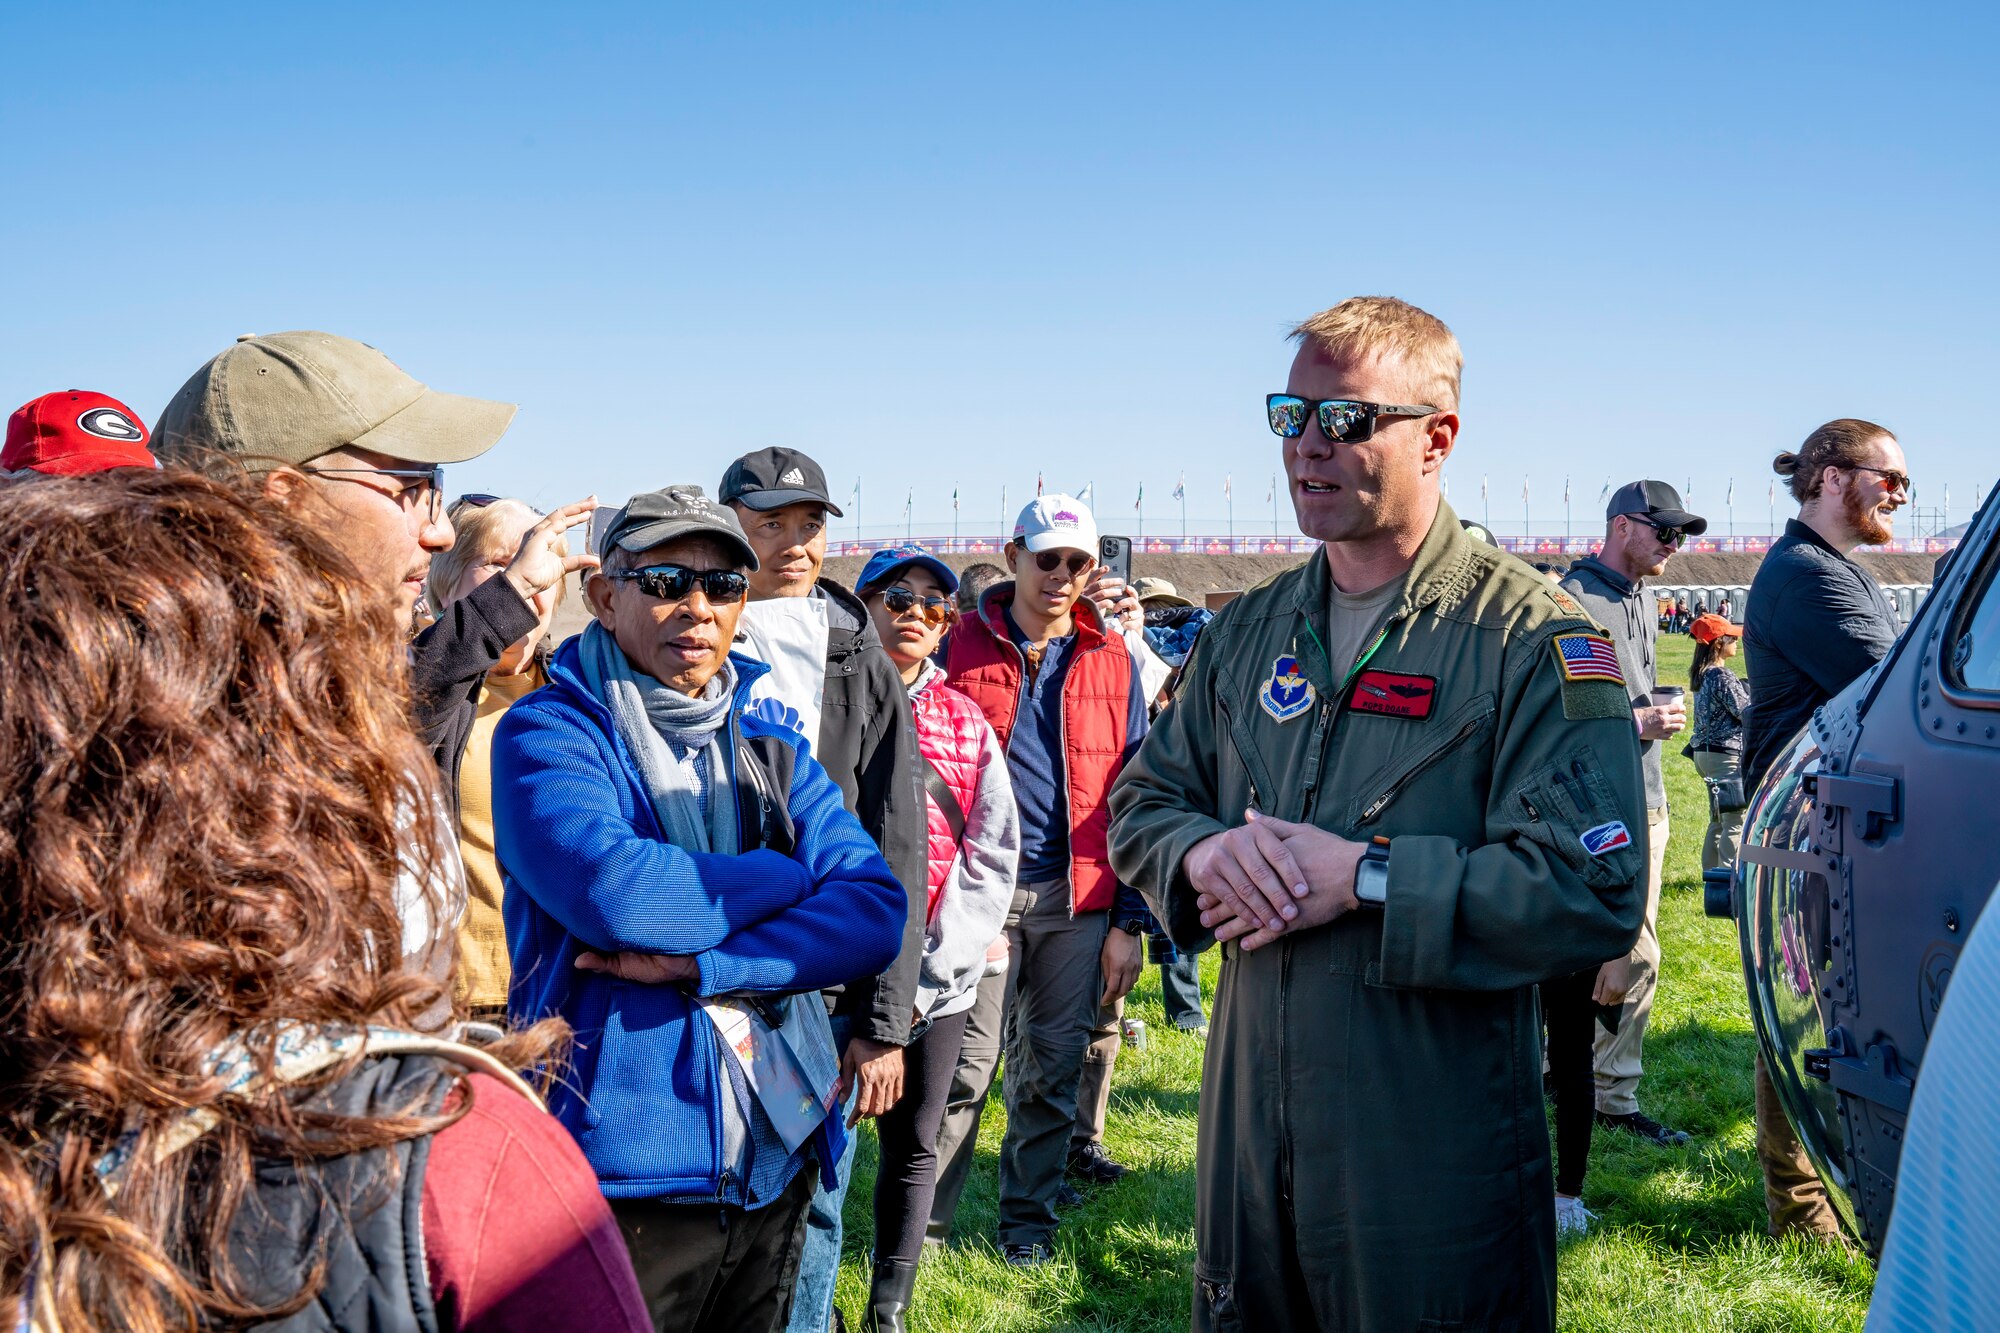 Helicopter pilot talks to visitors of the International Balloon Fiesta.